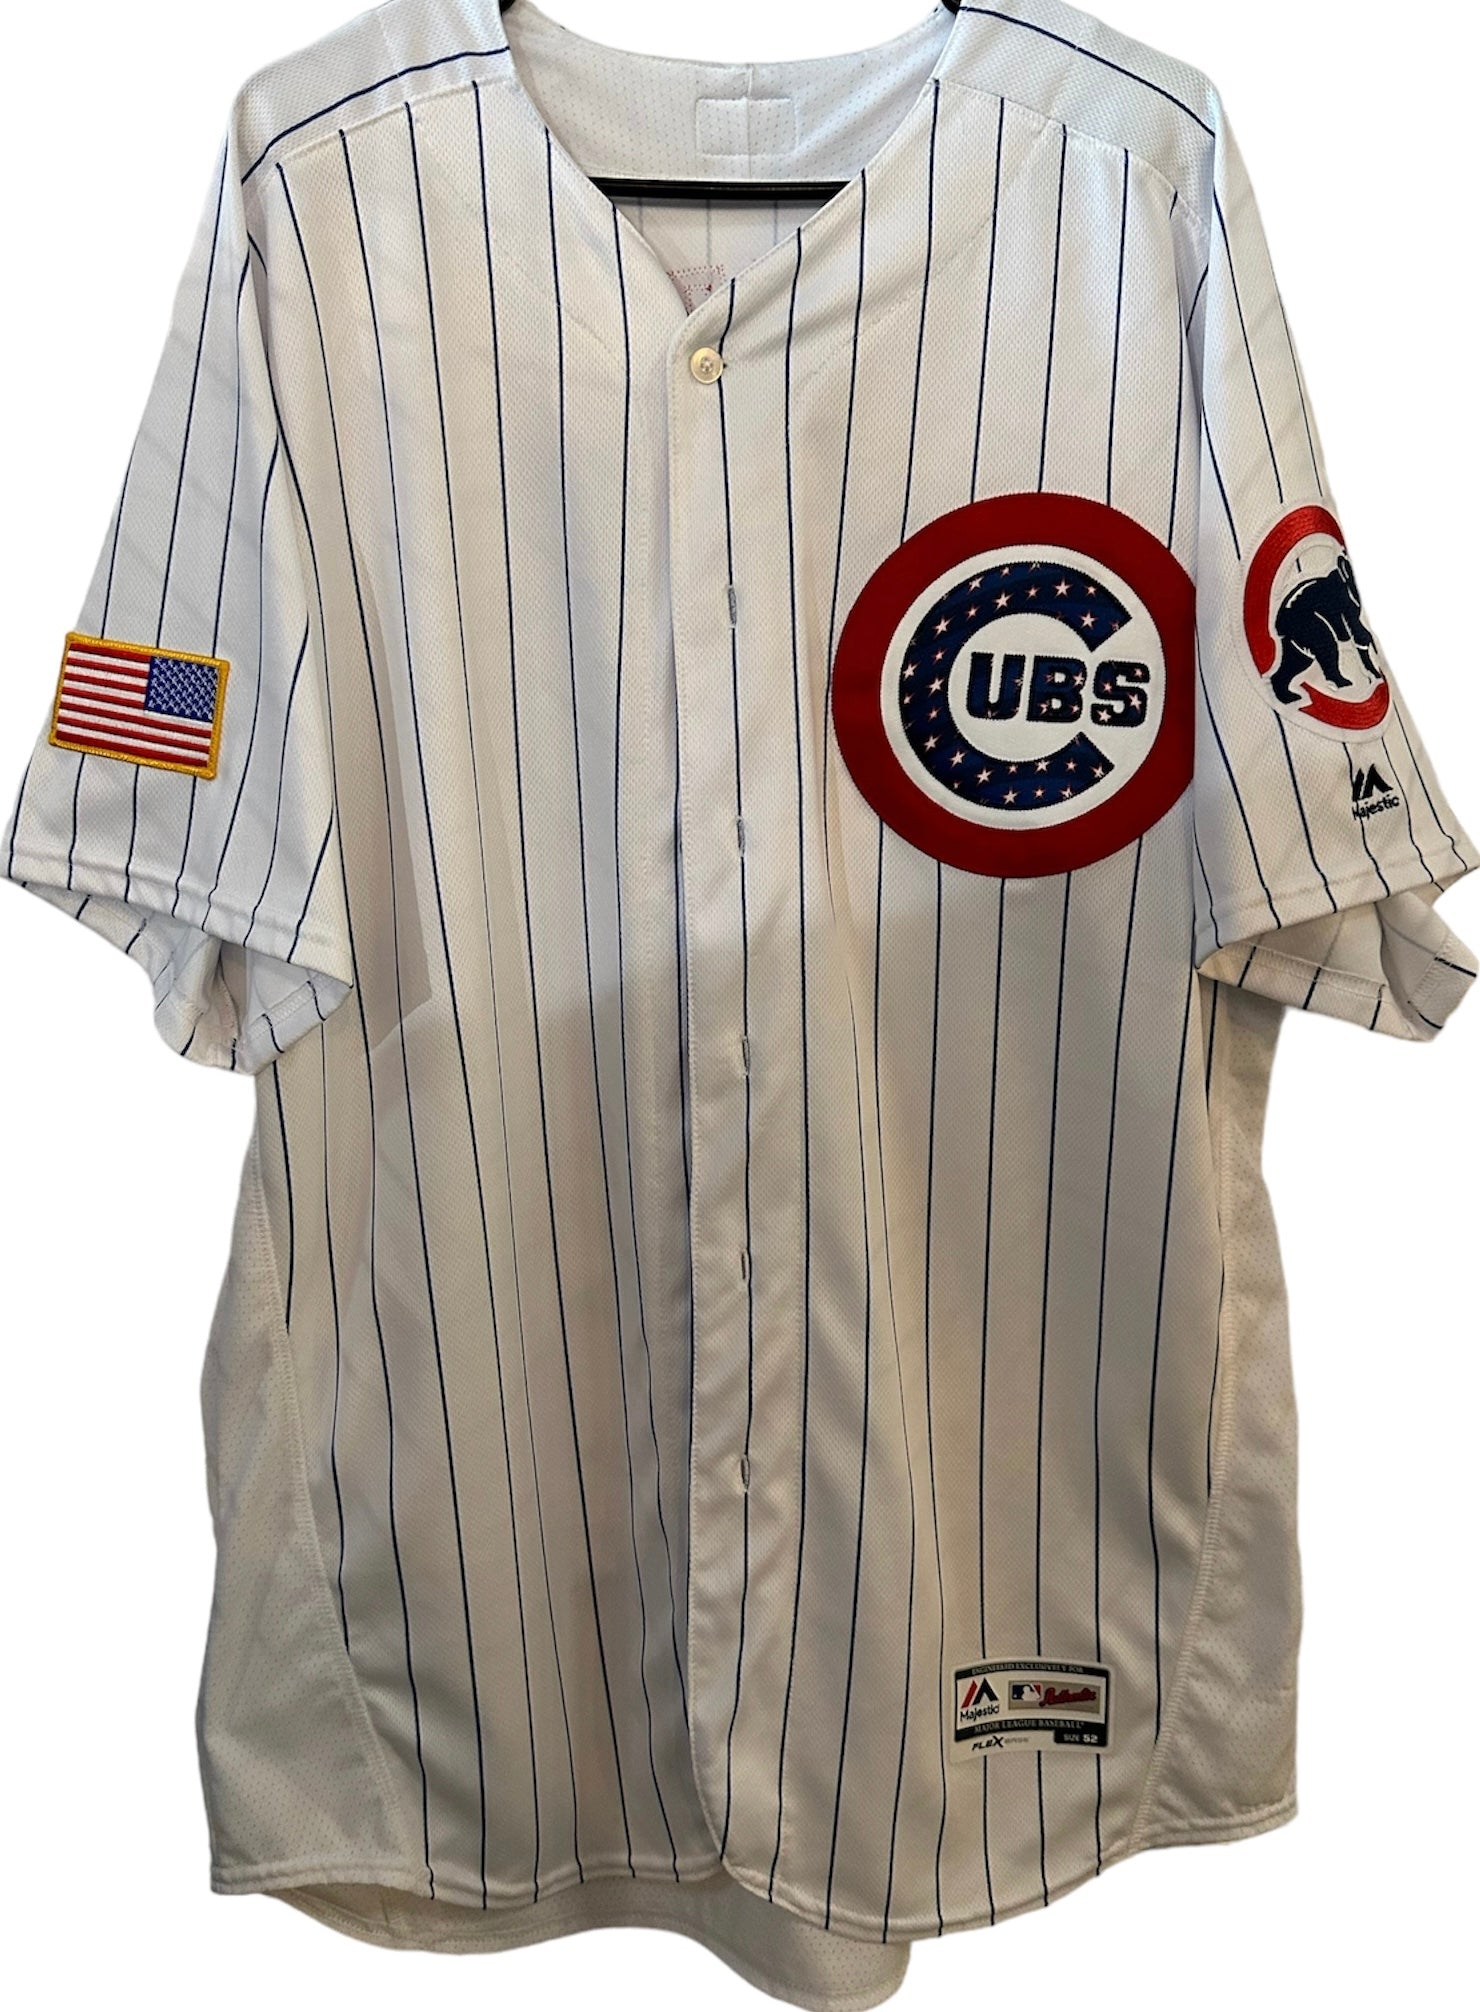 Majestic Kris Bryant 4th of July Cubs Jersey 4XL